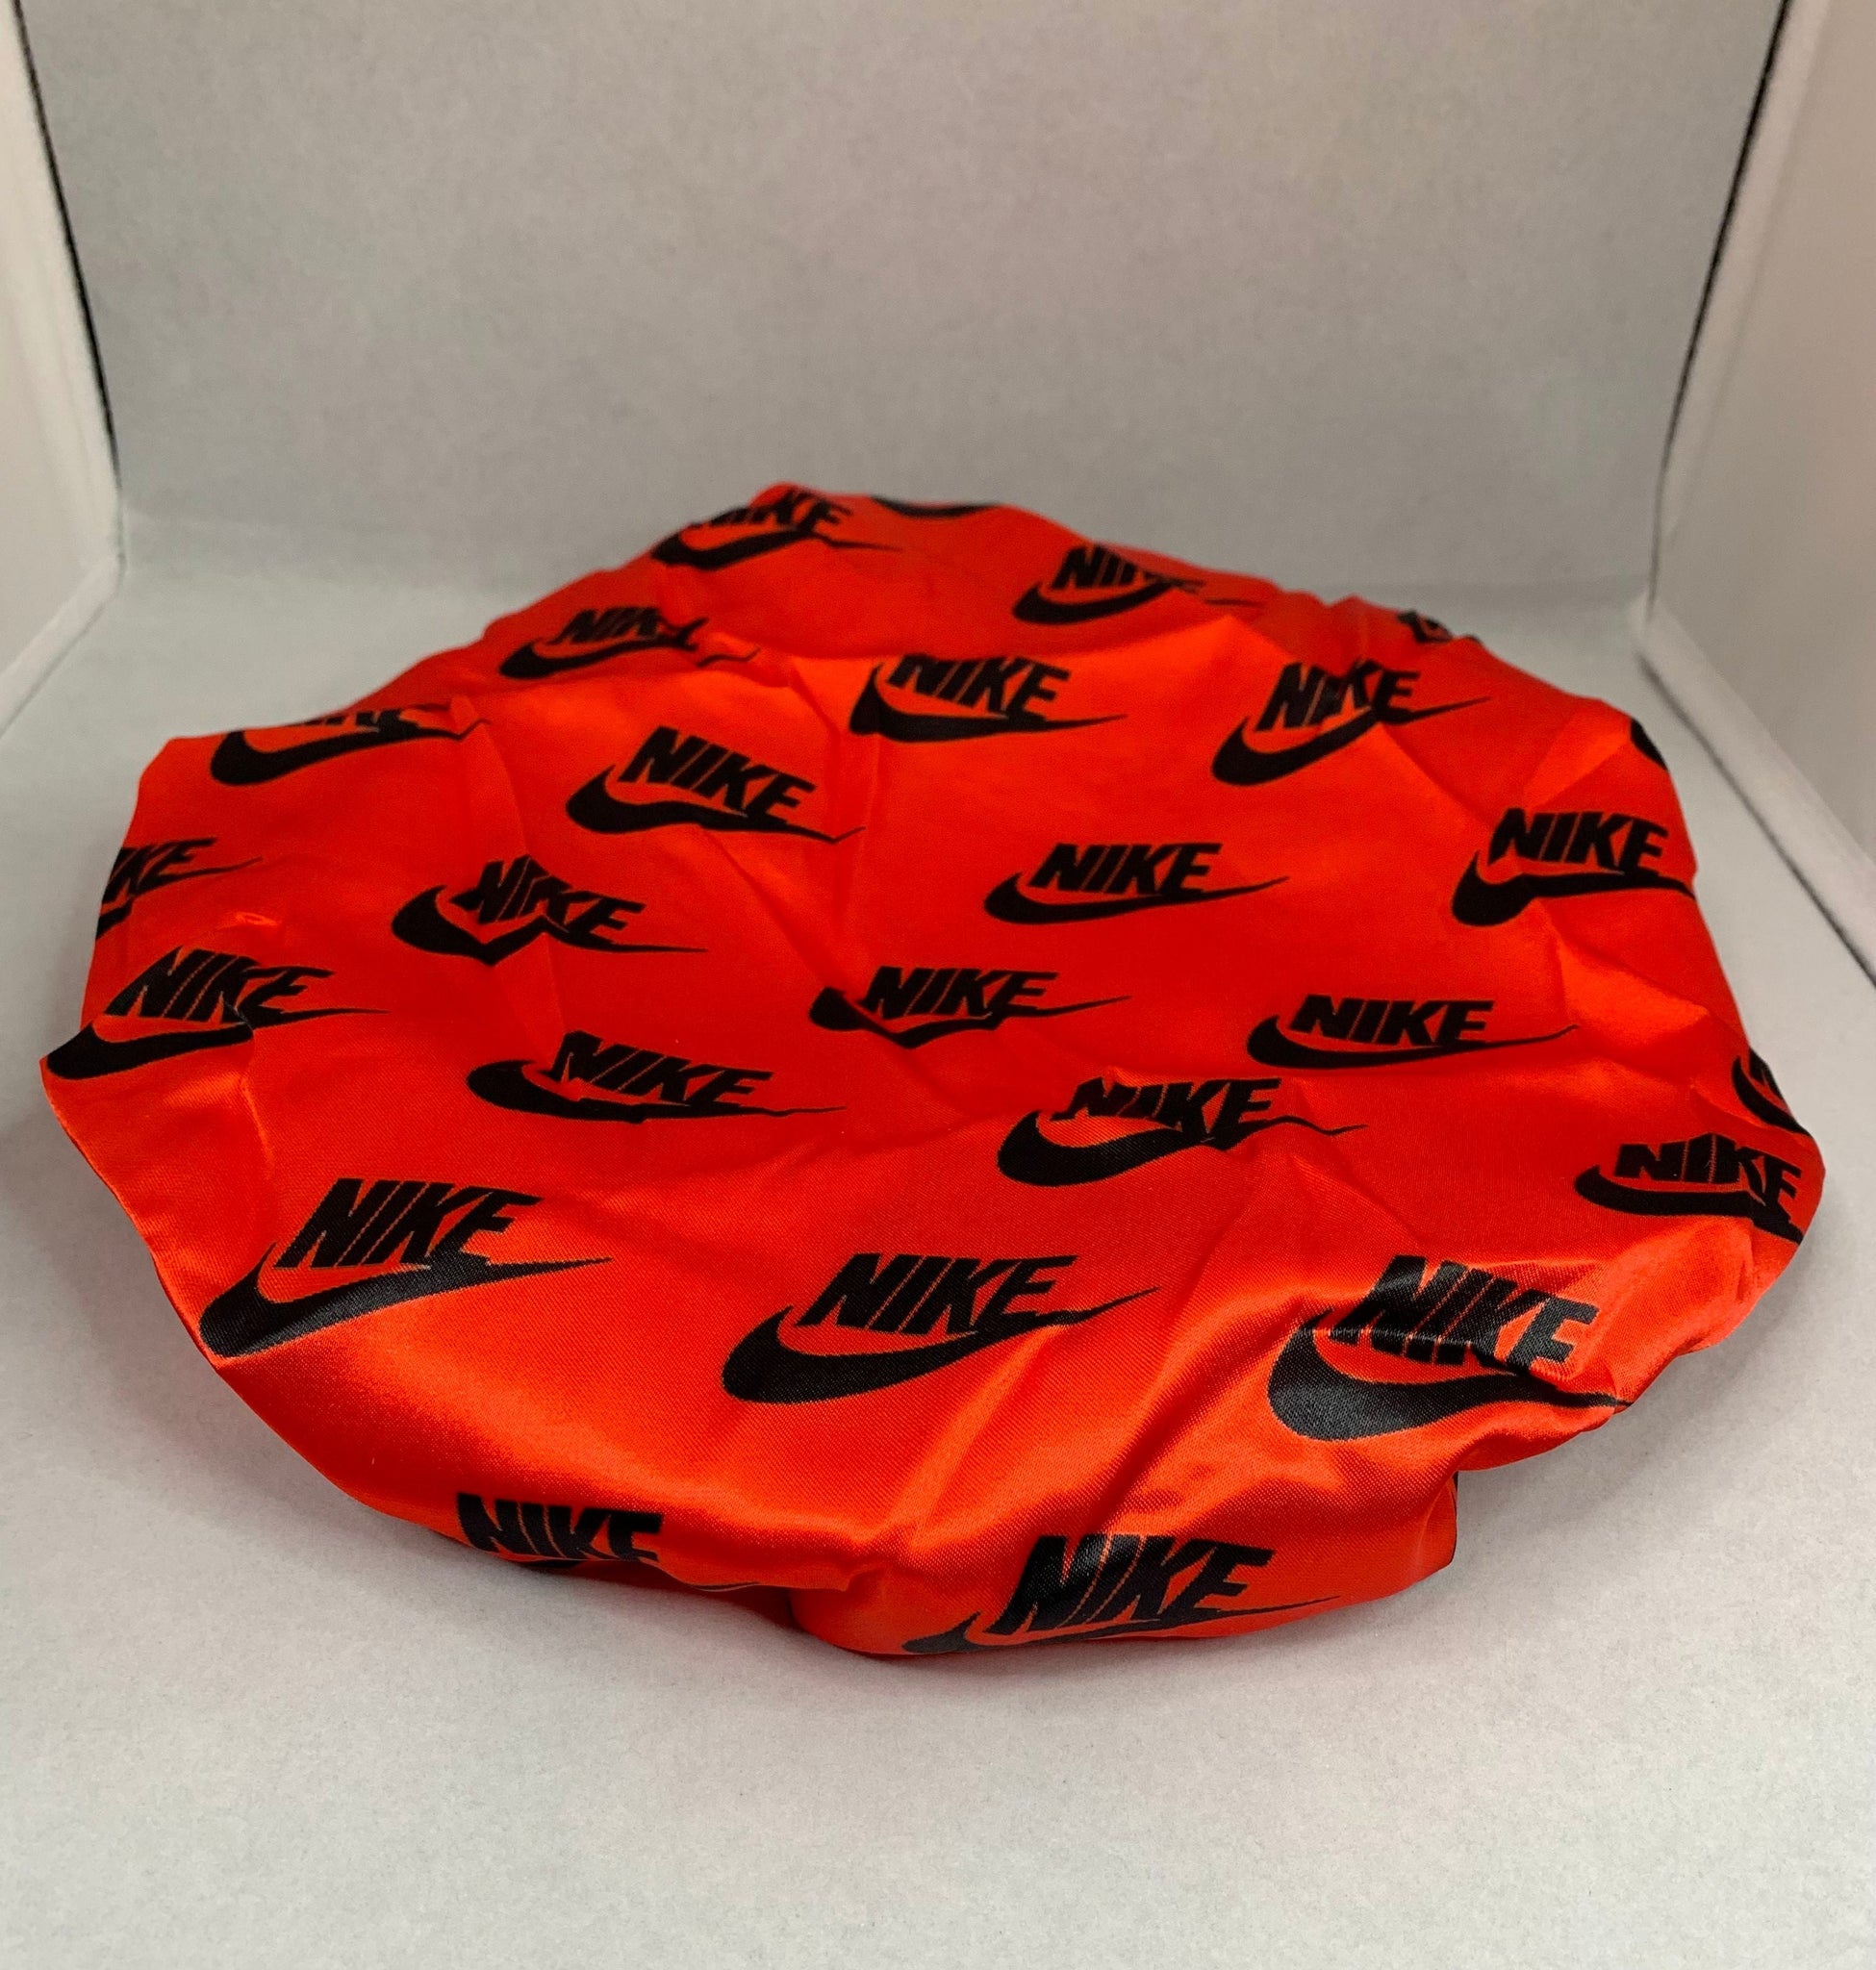 Red Nike Bonnet - Luxurious Durags